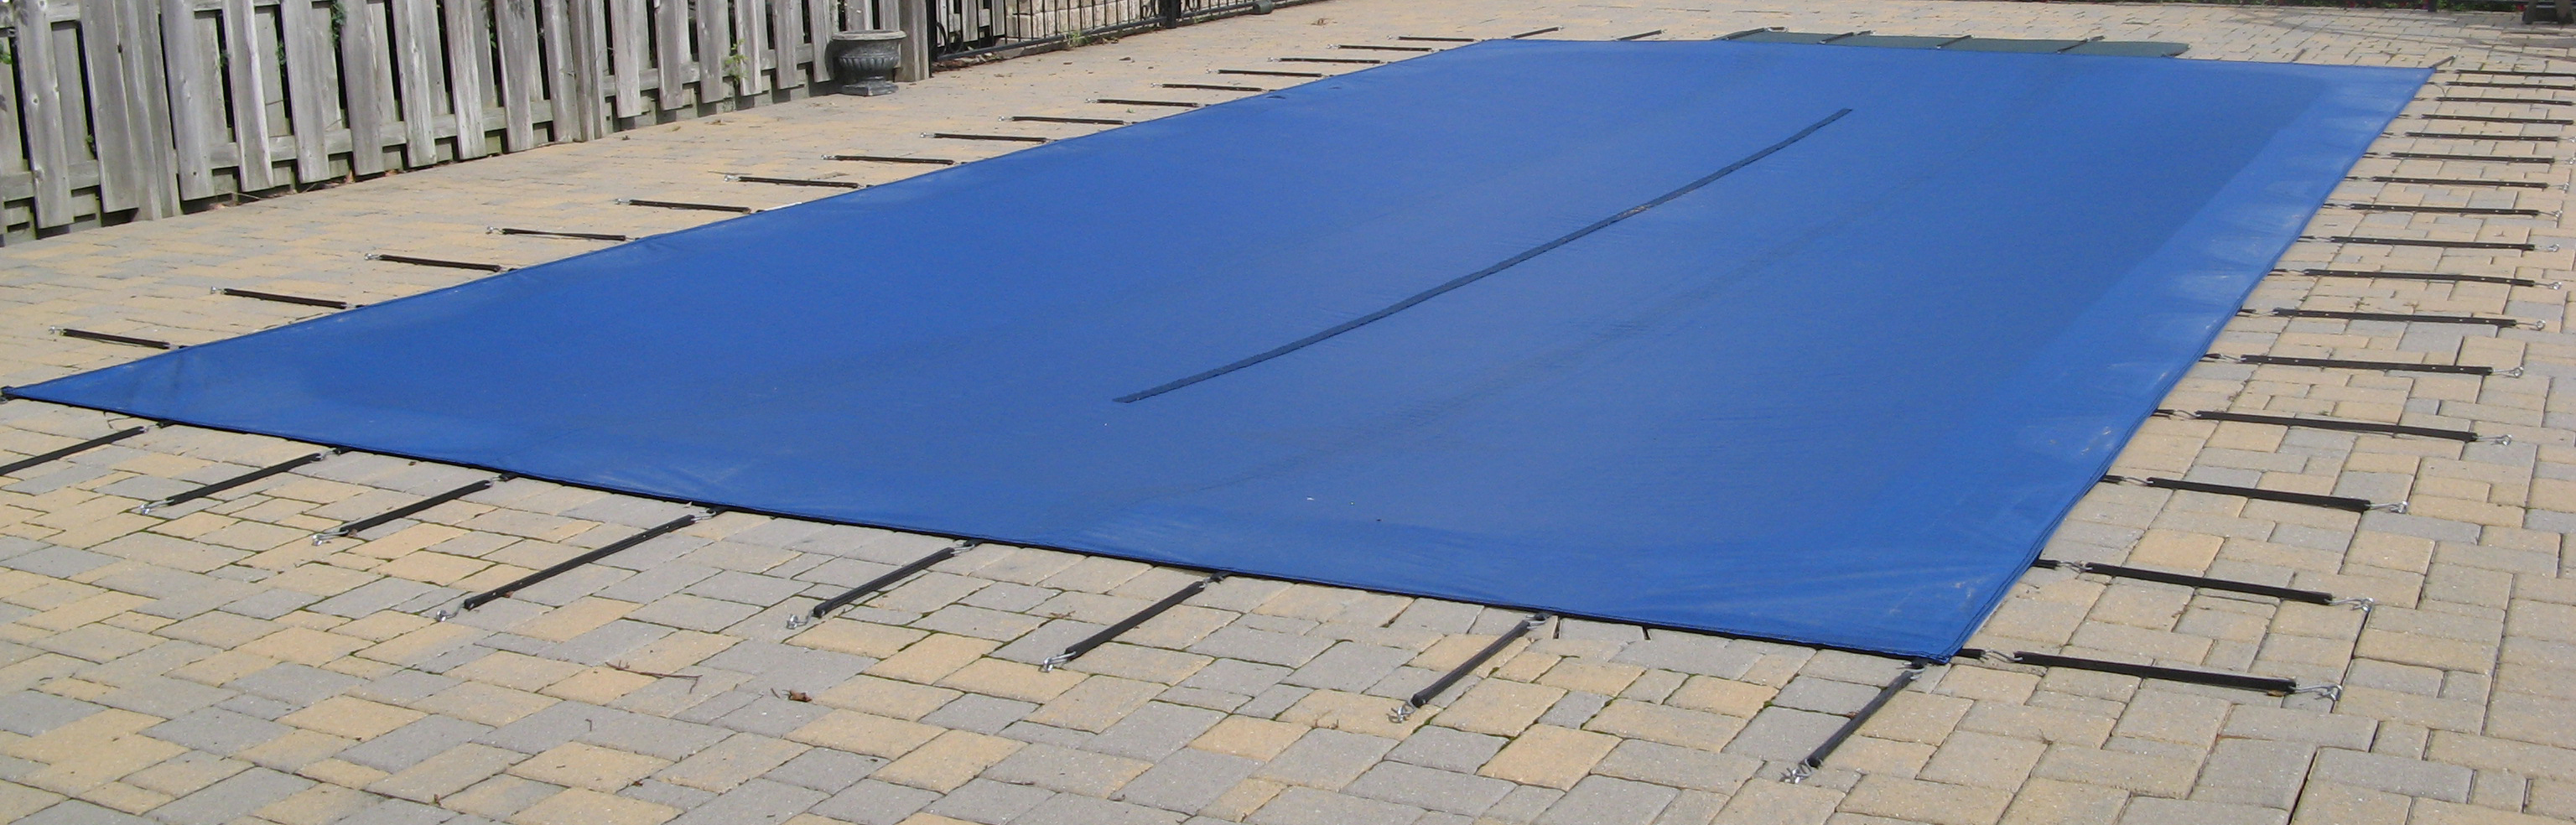 In-Ground Eliminator Winter Cover